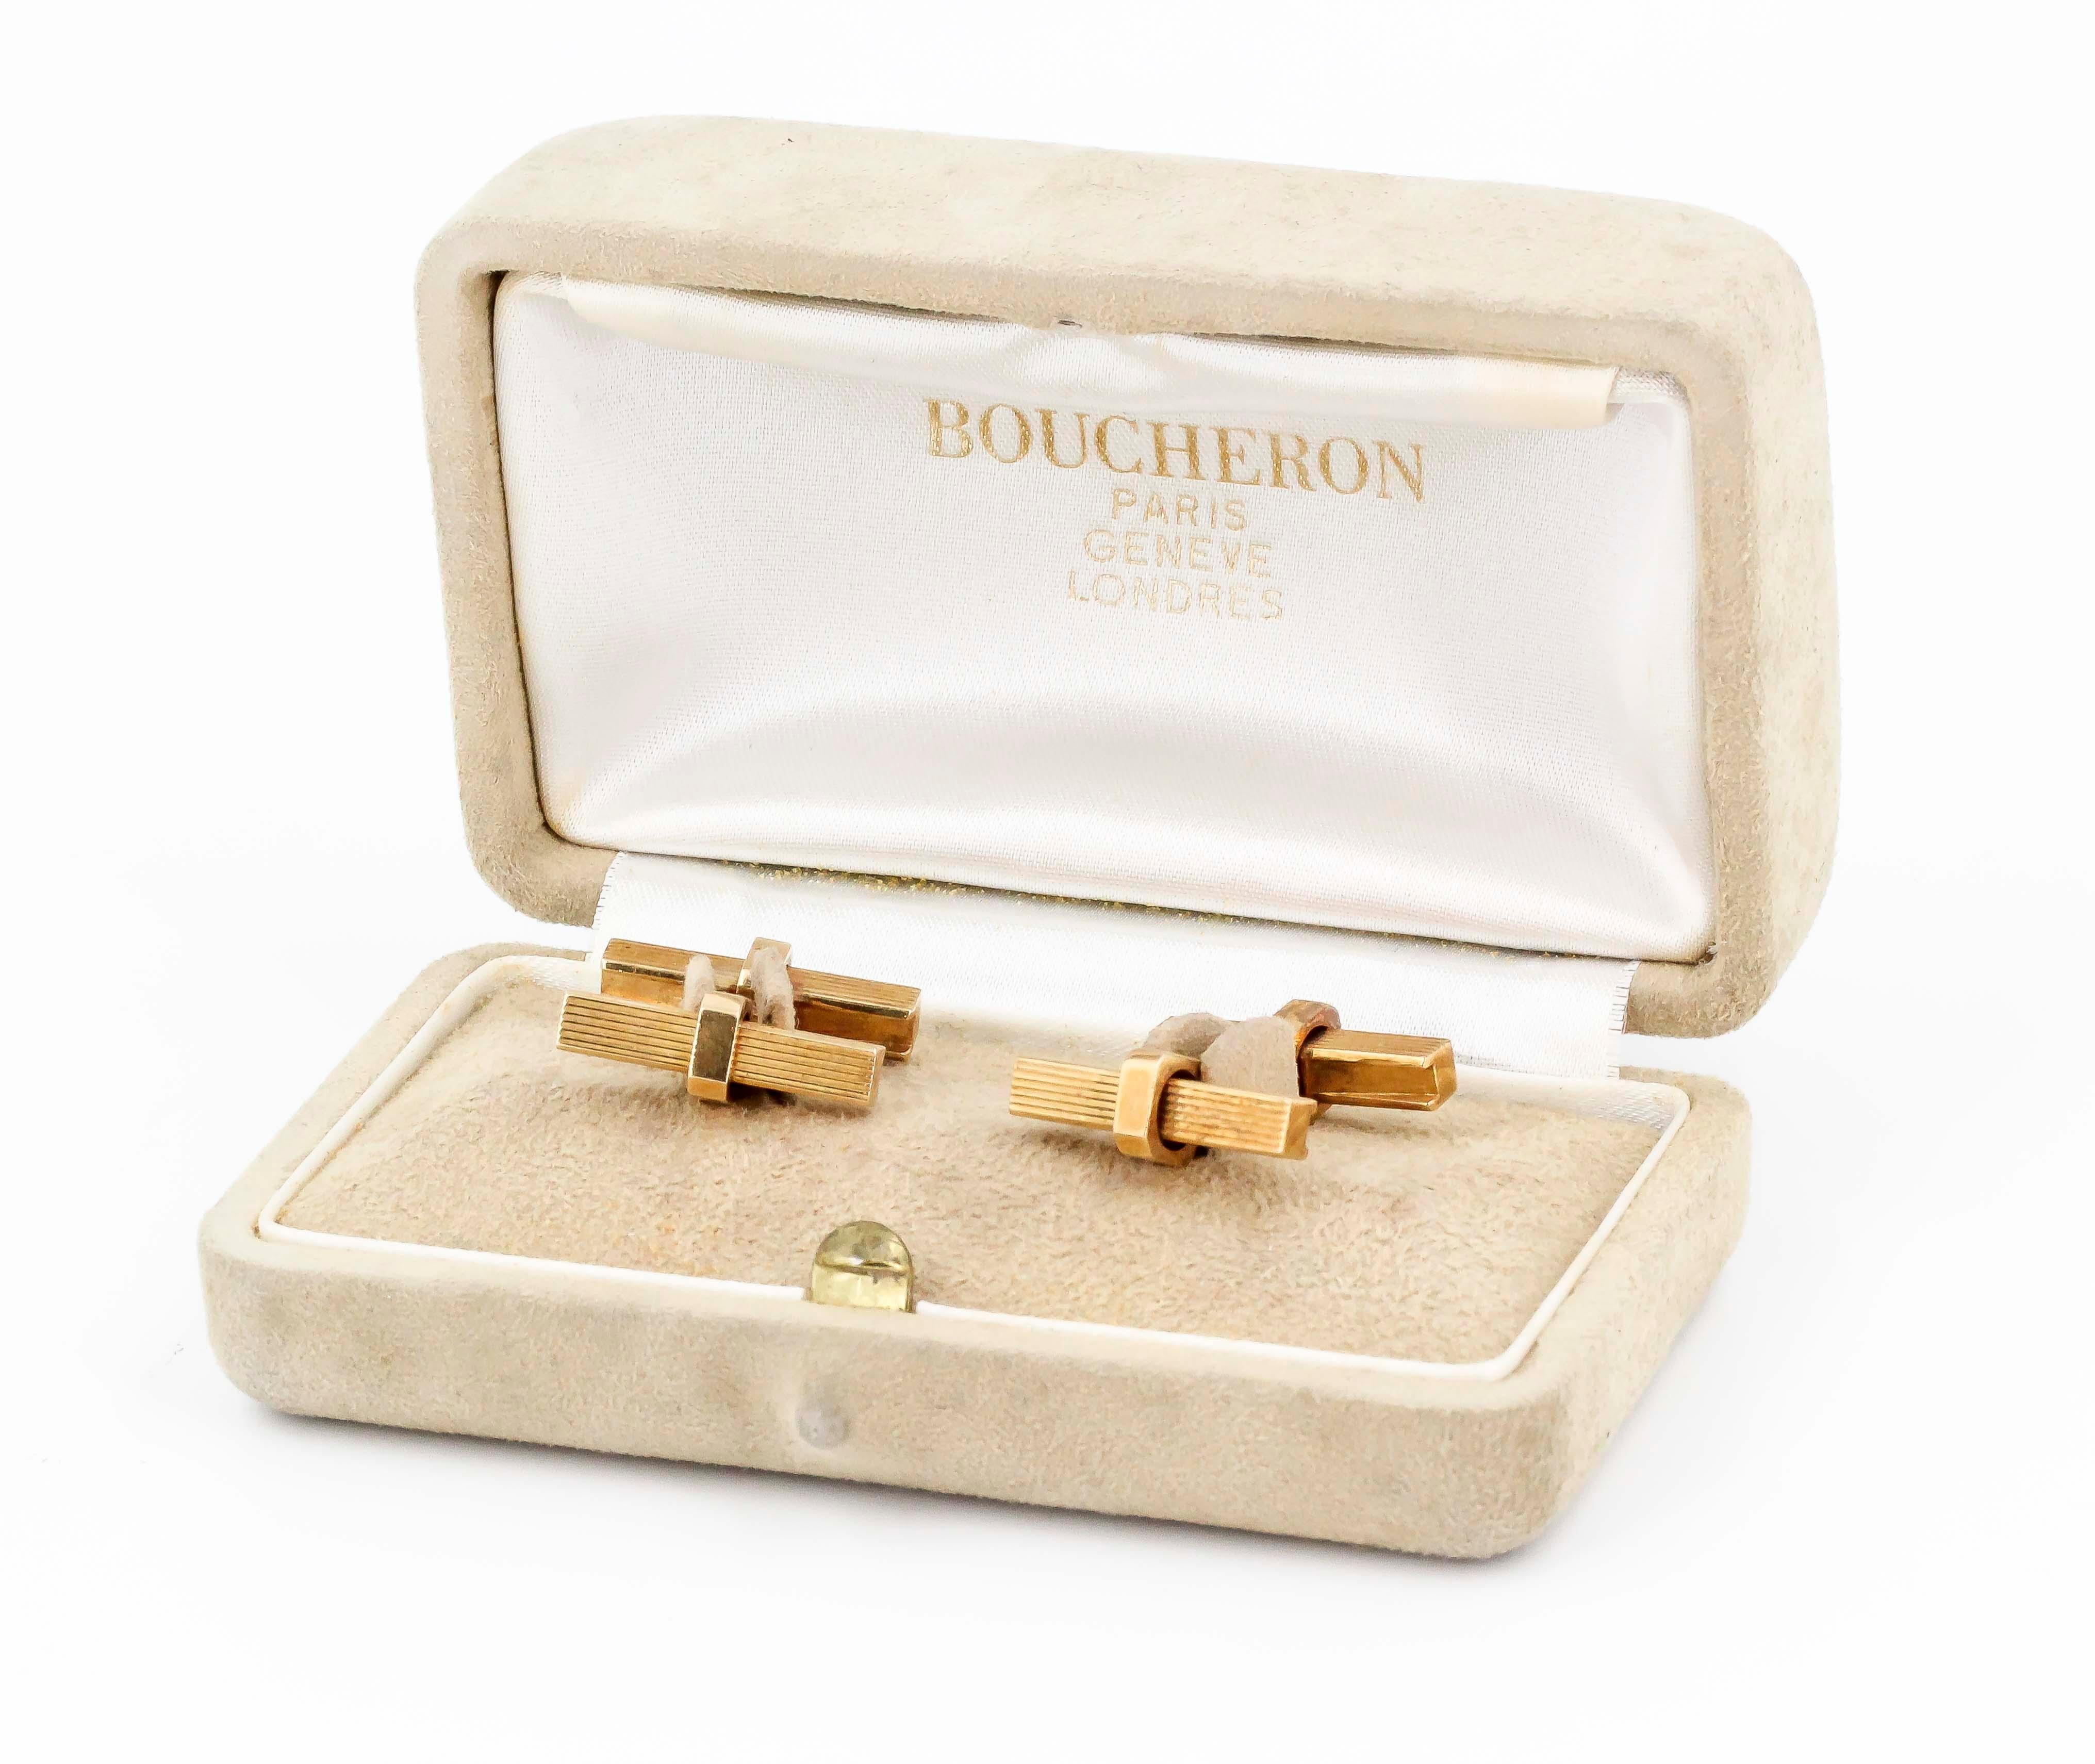 Handsome 18K yellow gold square bar cufflinks by Boucheron. They feature a ribbed design on each bar. 

Hallmarks: Boucheron, OR 750, French 18K gold assay mark, maker's mark.
